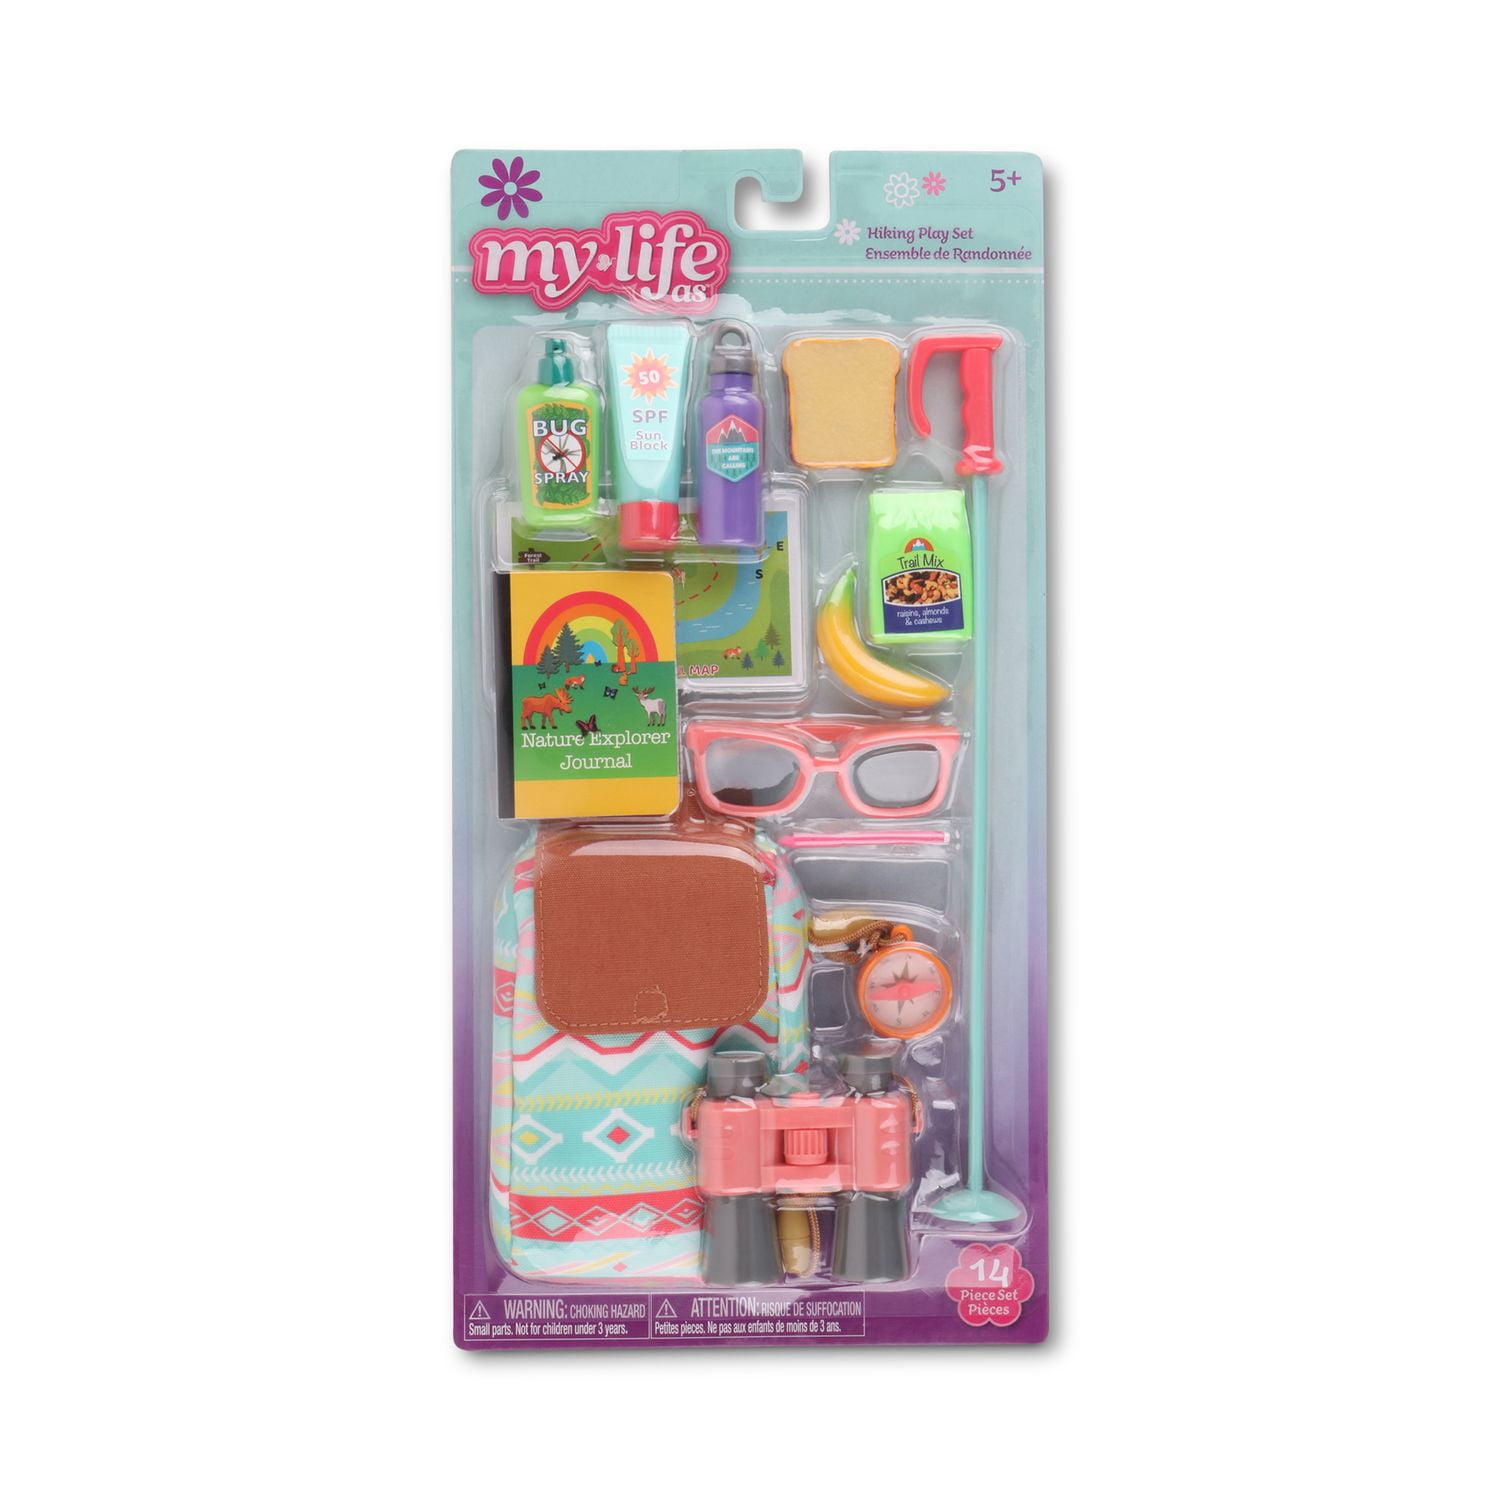 Hiking Accessories Set, Playset for 6-inch Dolls